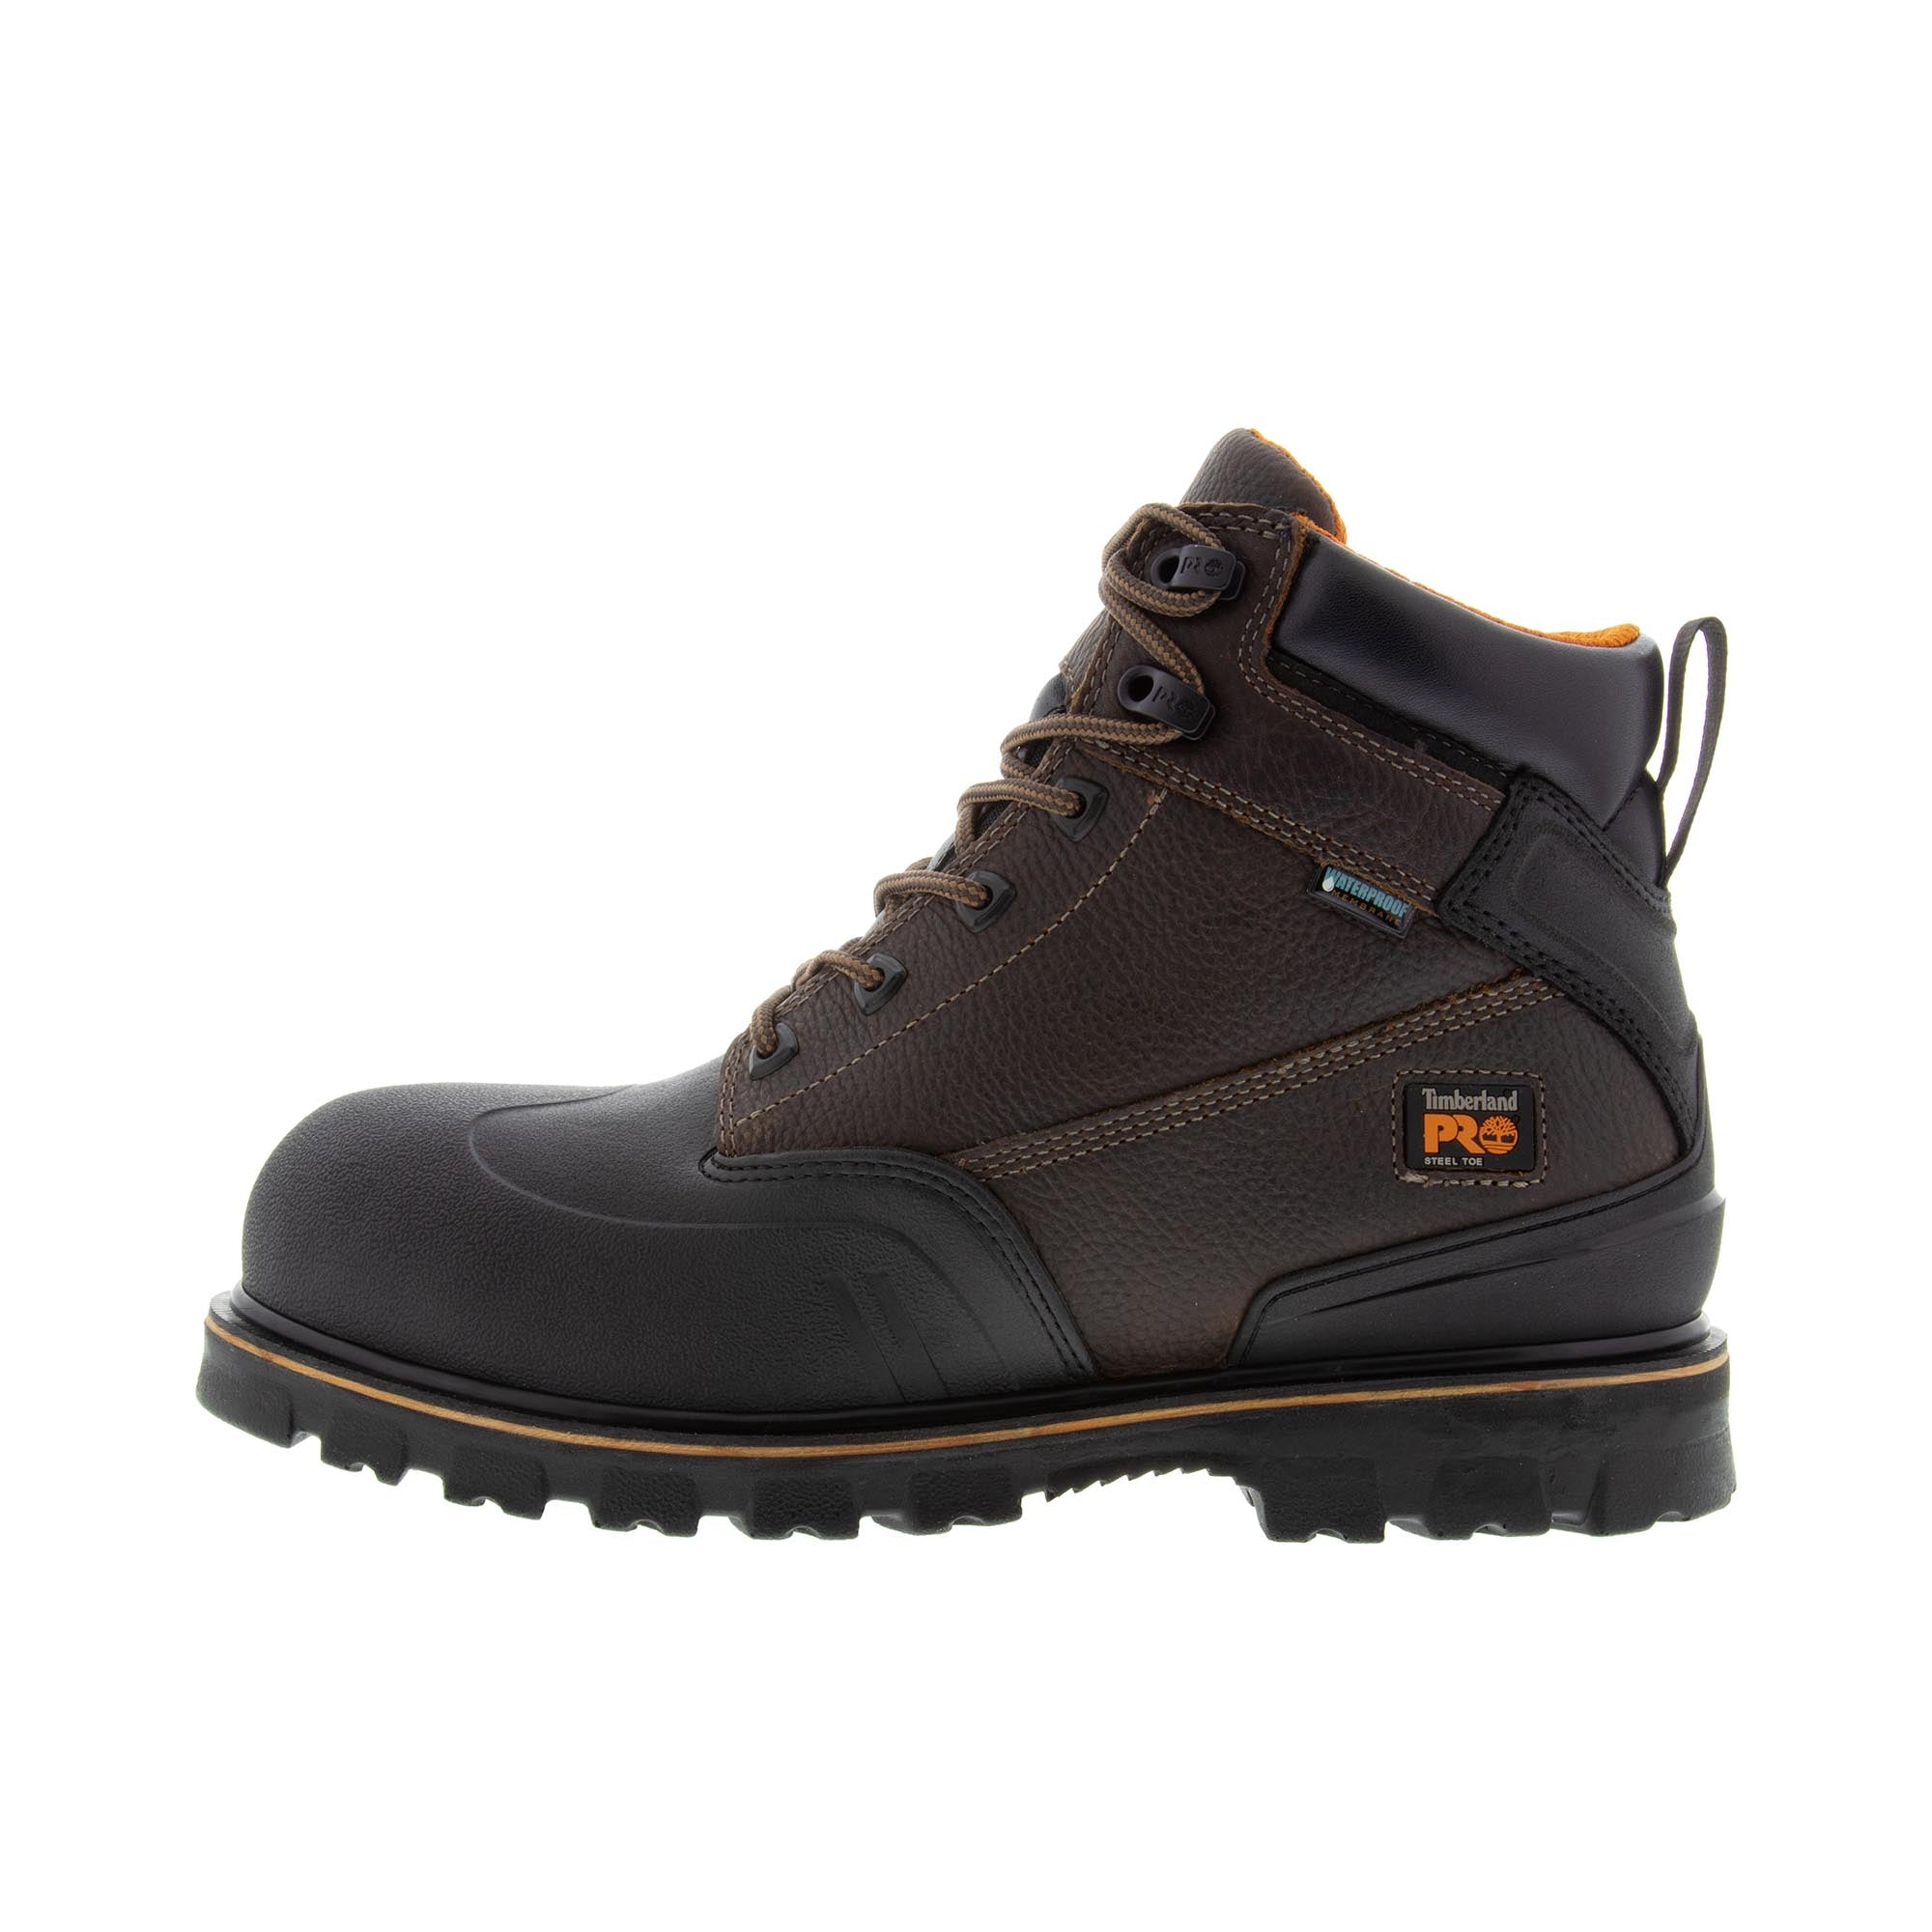 Timberland Pro 6 Inch Rigmaster Steel Toe Brown